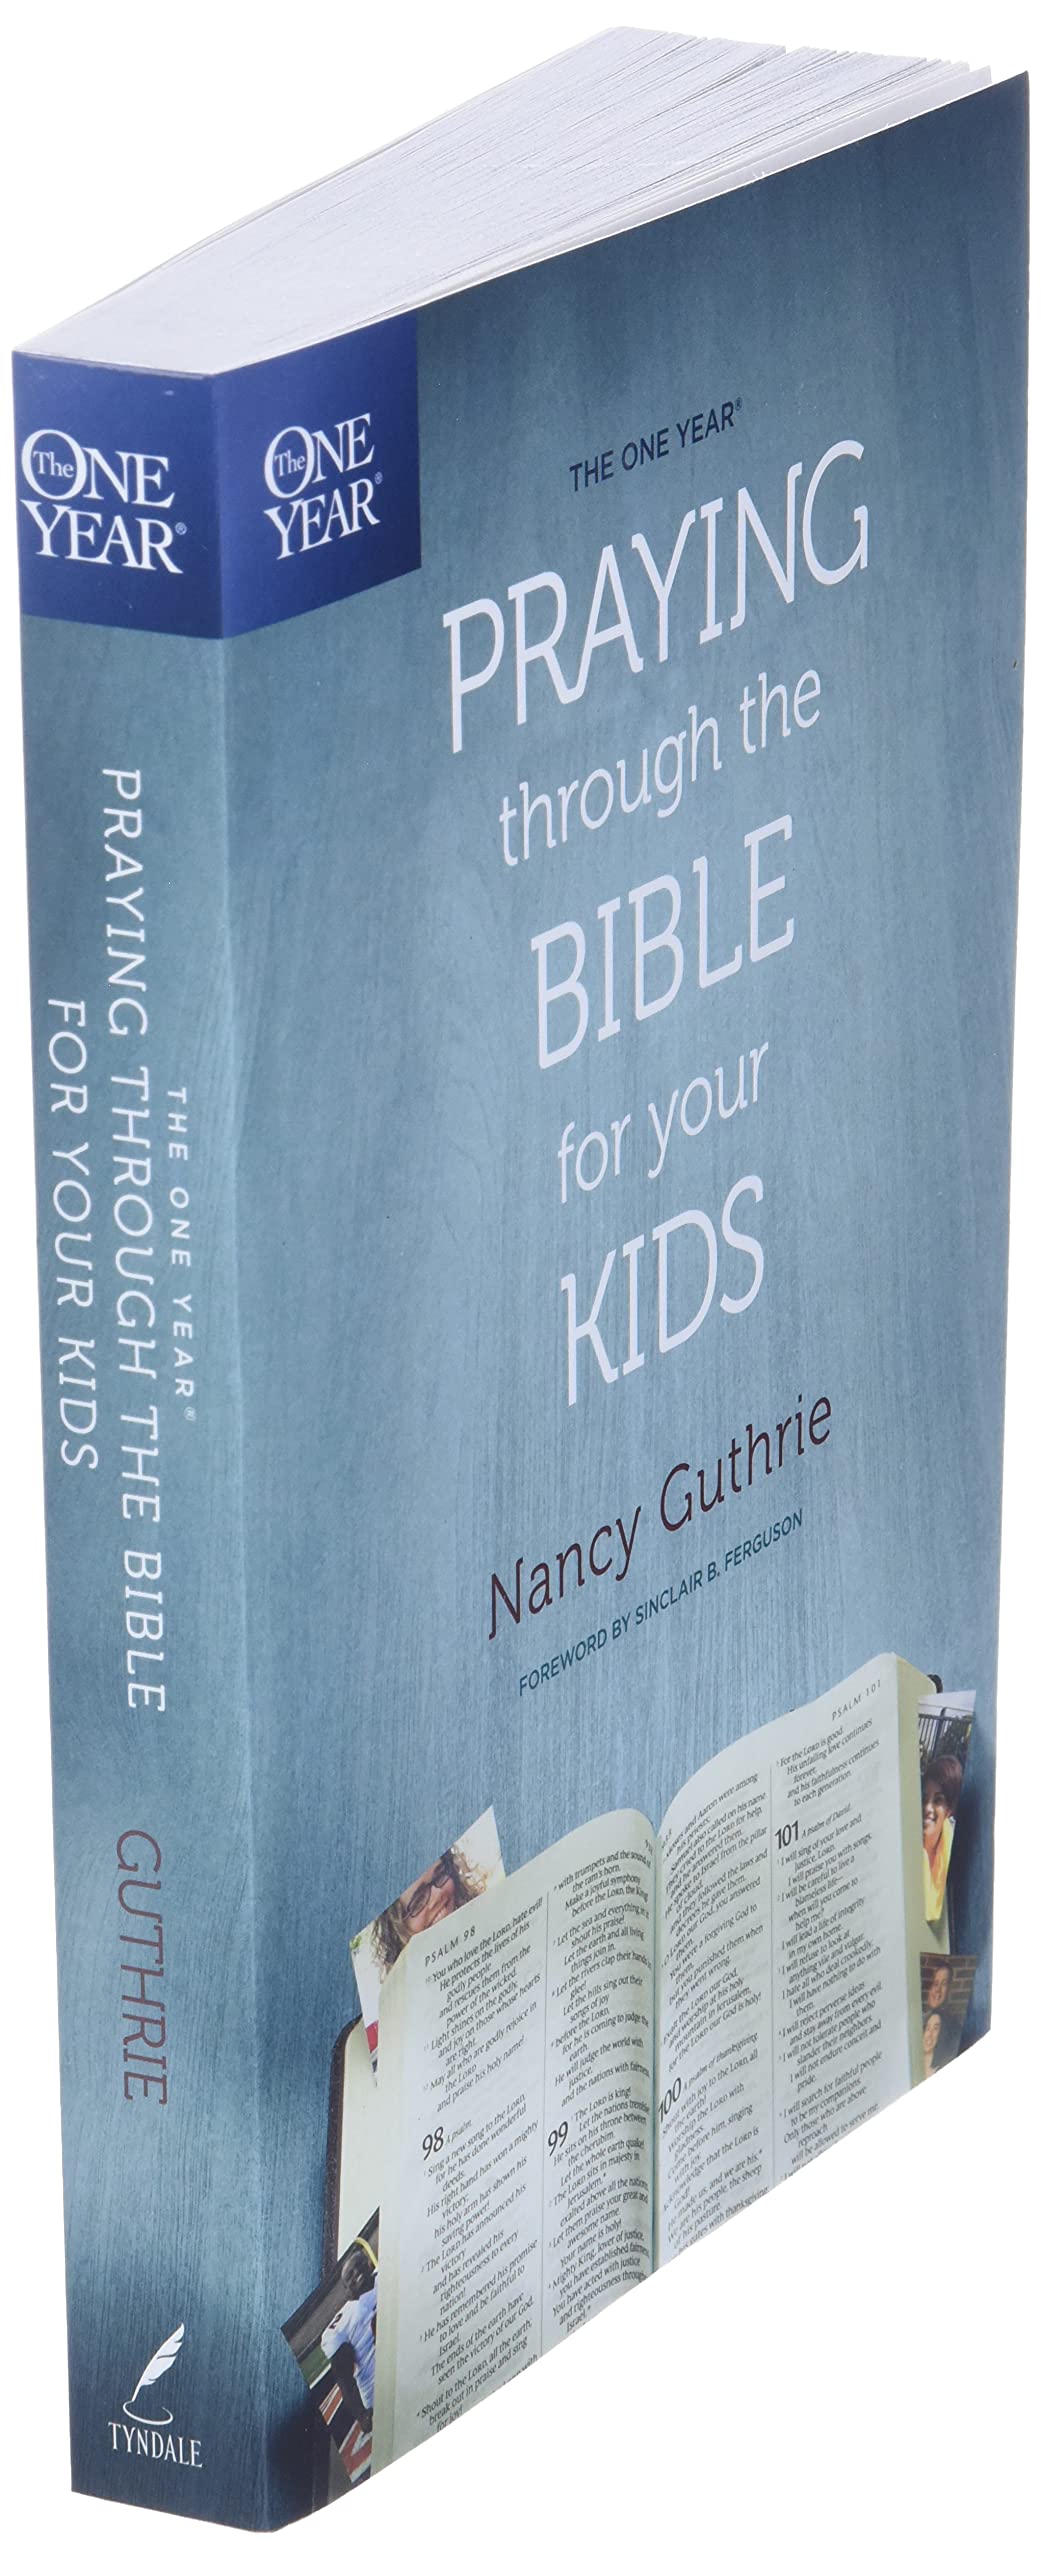 The One Year: Praying through the Bible for Your Kids